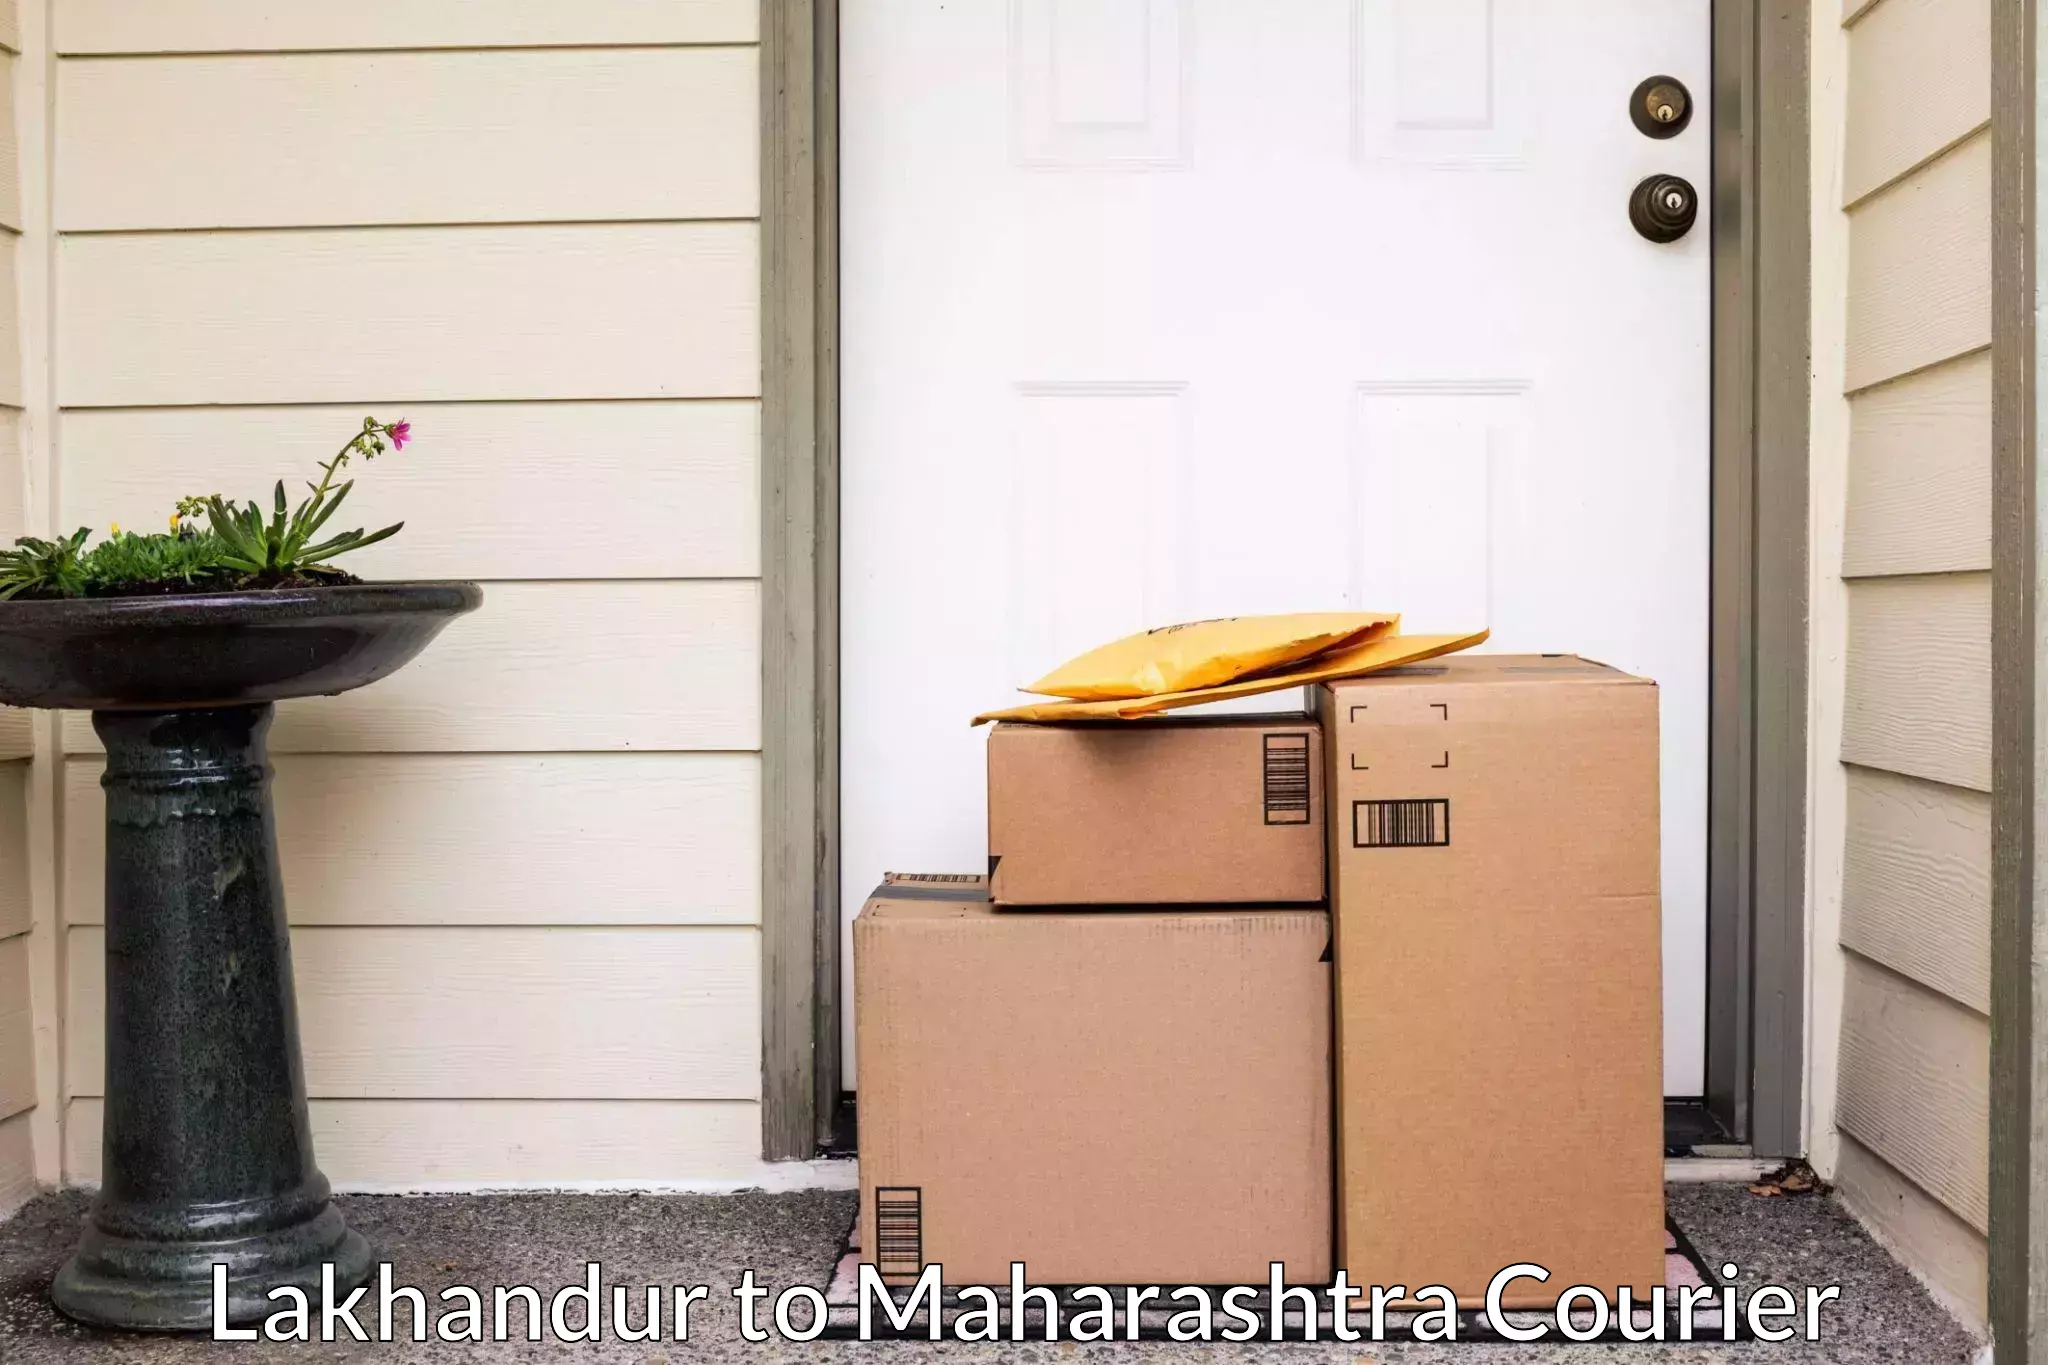 Reliable furniture movers in Lakhandur to Maharashtra